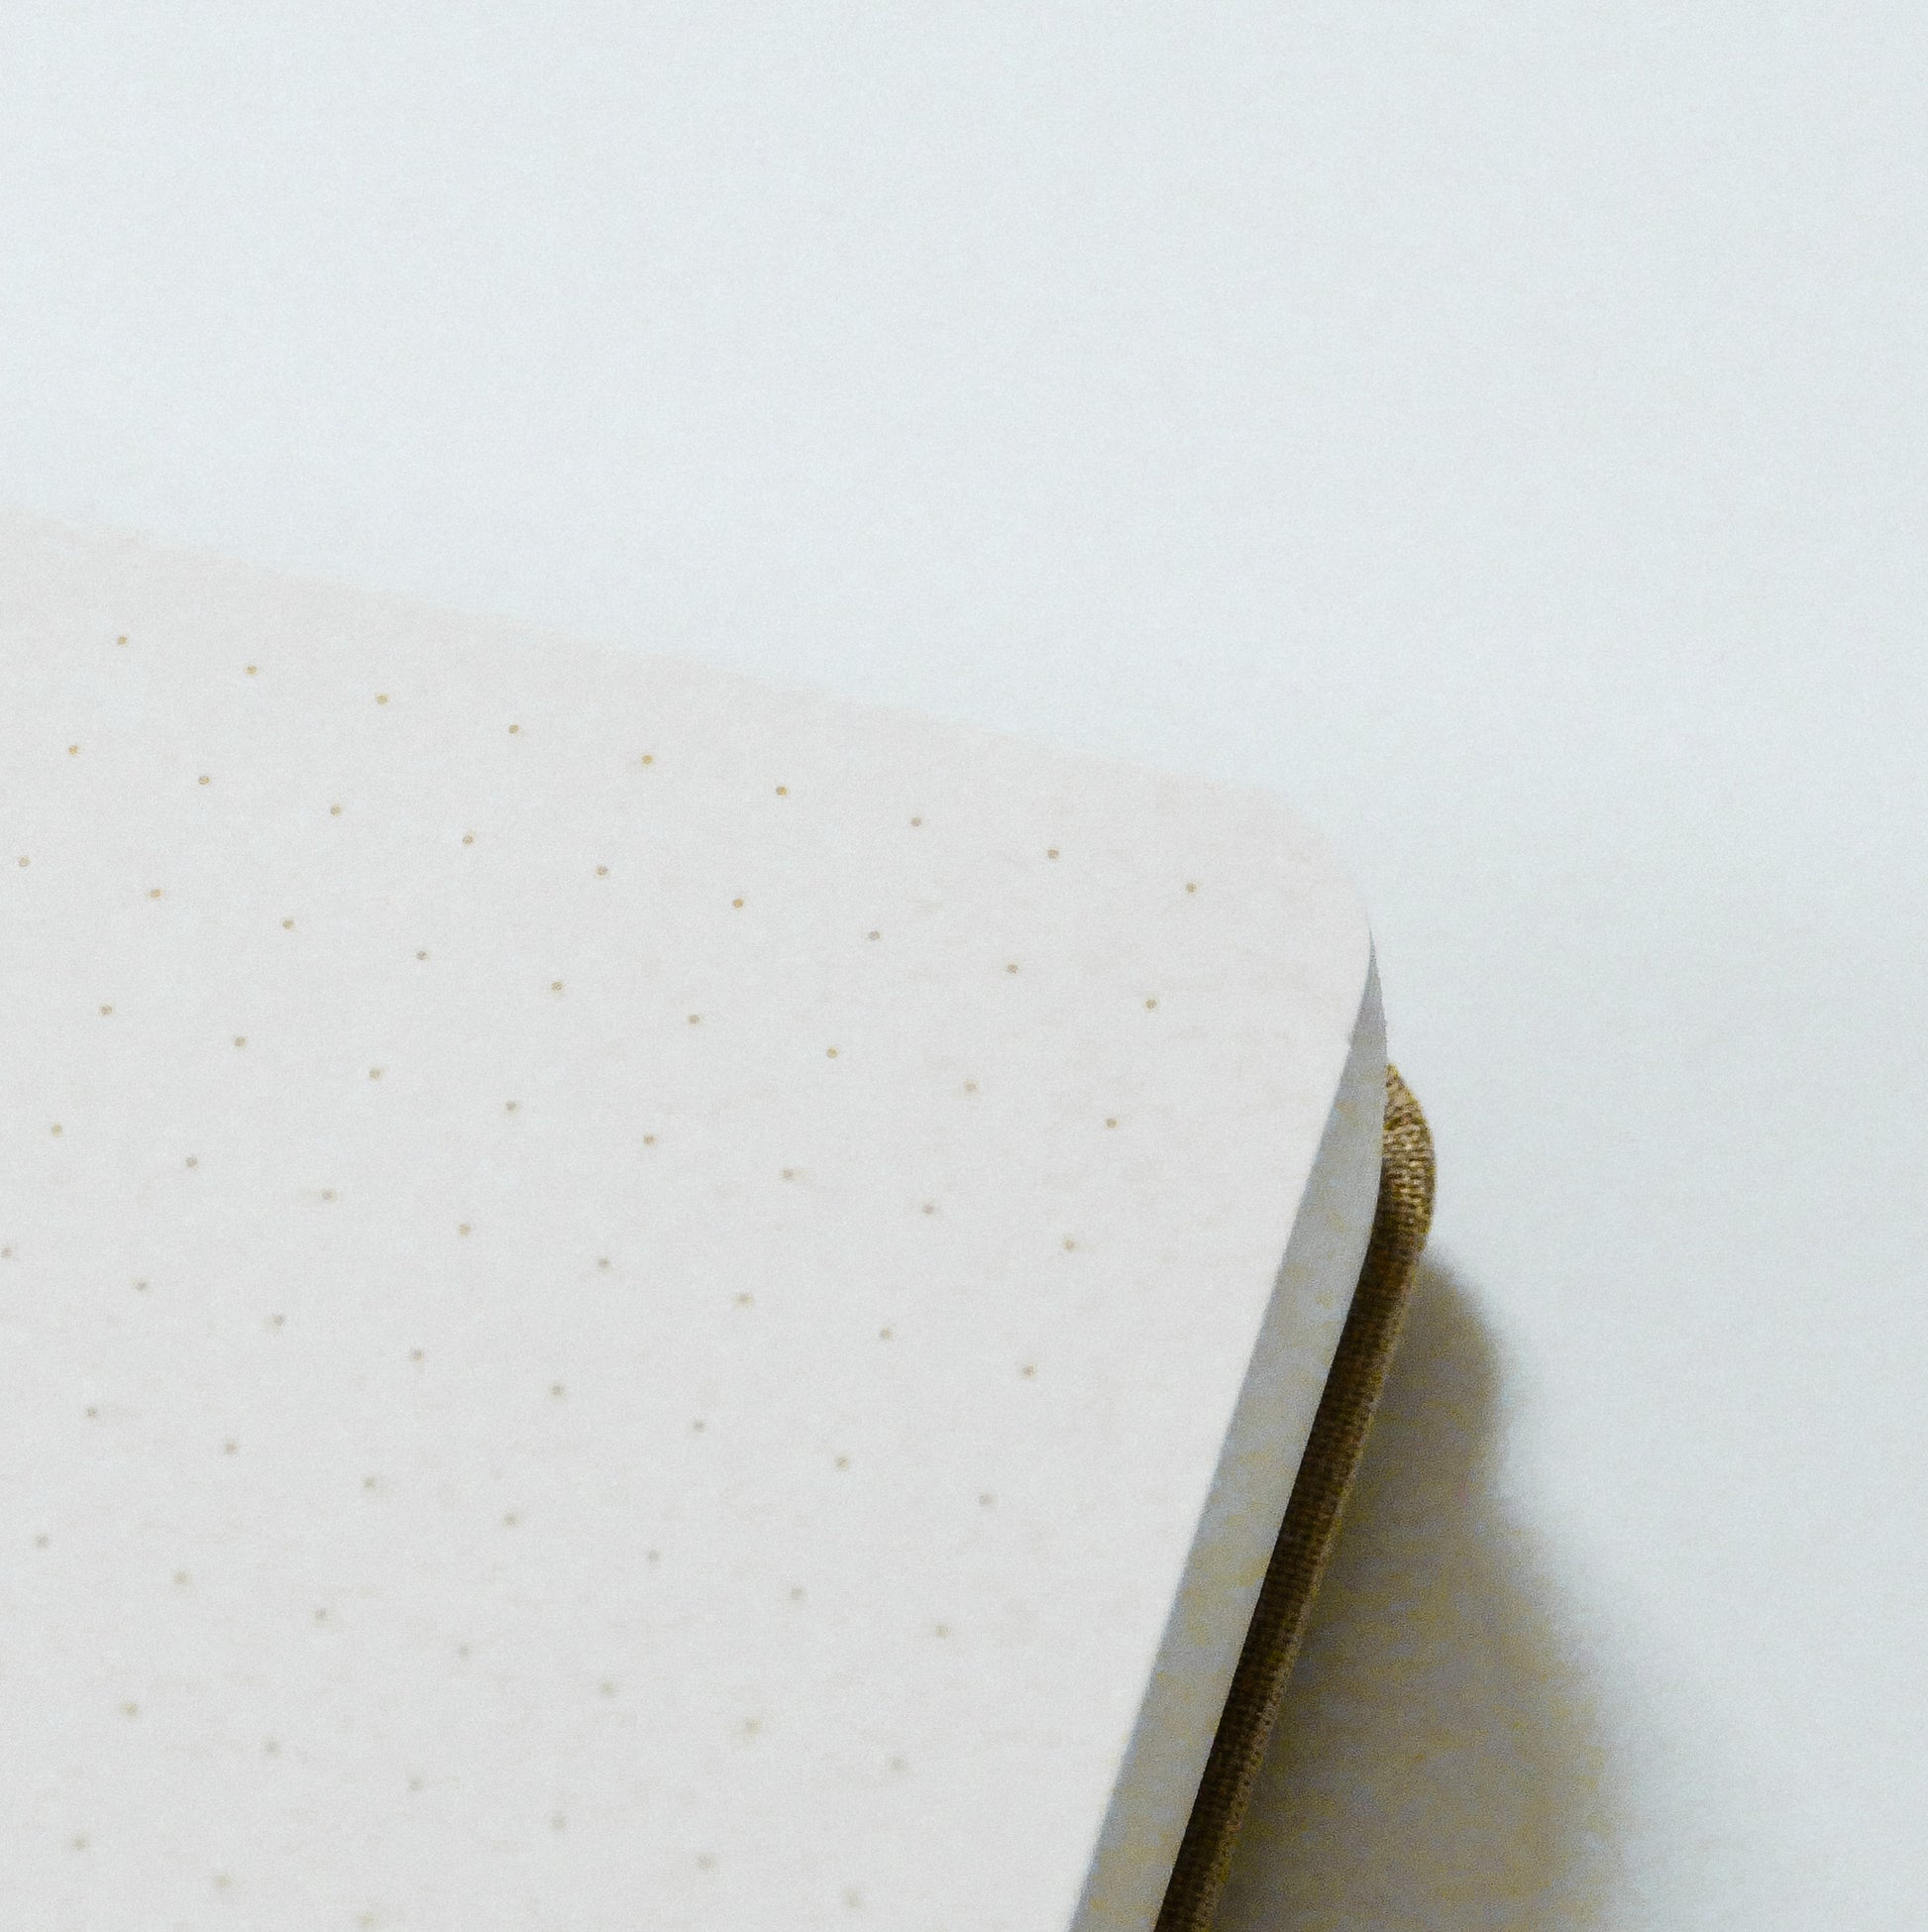 A5 Stardust - White Dot Grid Notebook (192 Pages) – Our Watered Grass